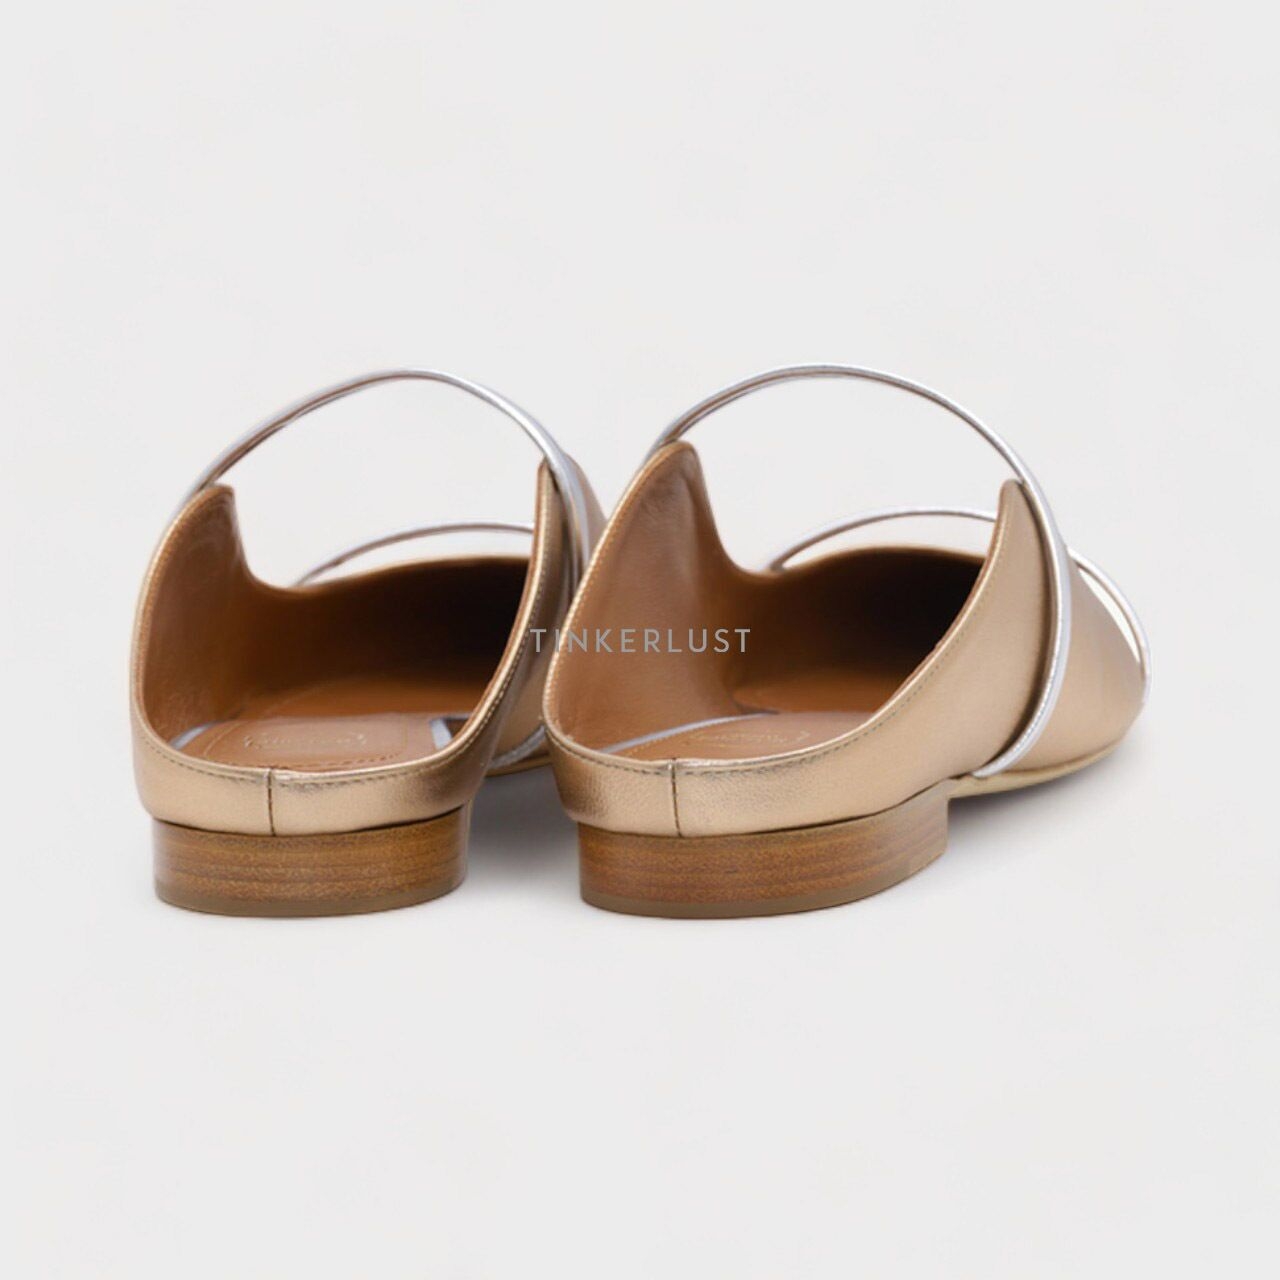 Malone Souliers Maureen Mules Gold/Silver Sandals